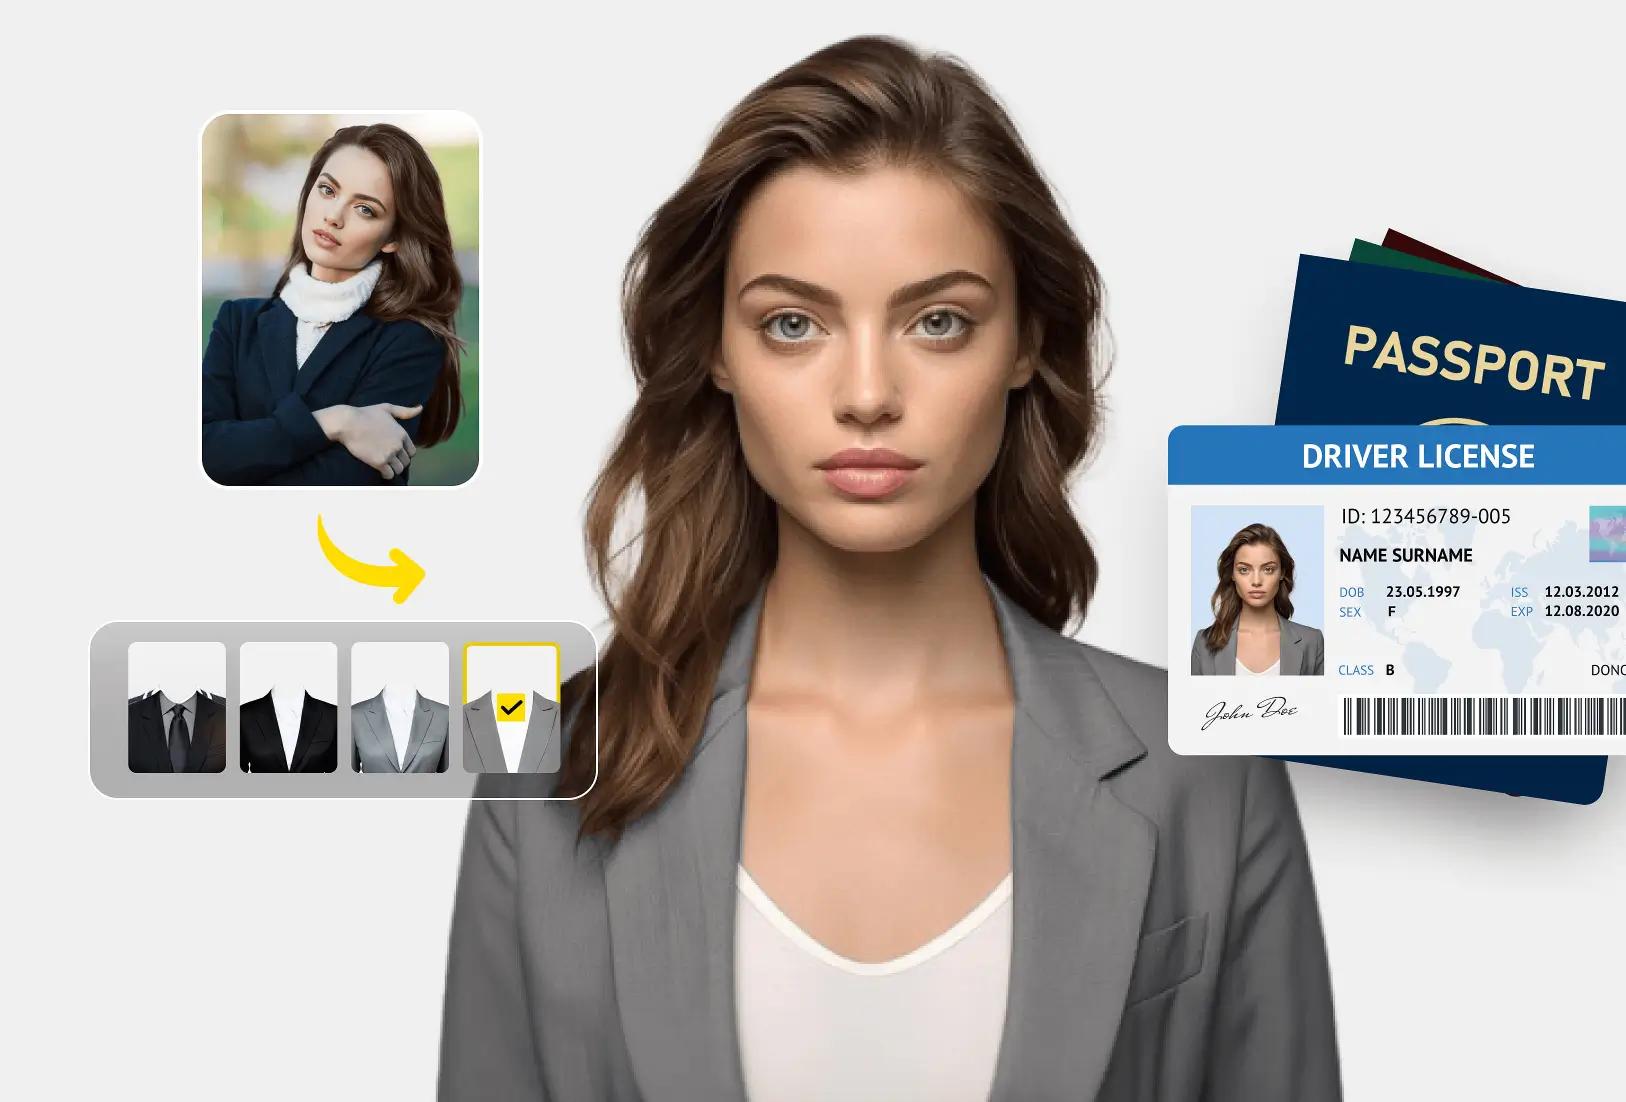 Instantly dress up for your ID photo with our AI Outfit feature, suitable for official documents.